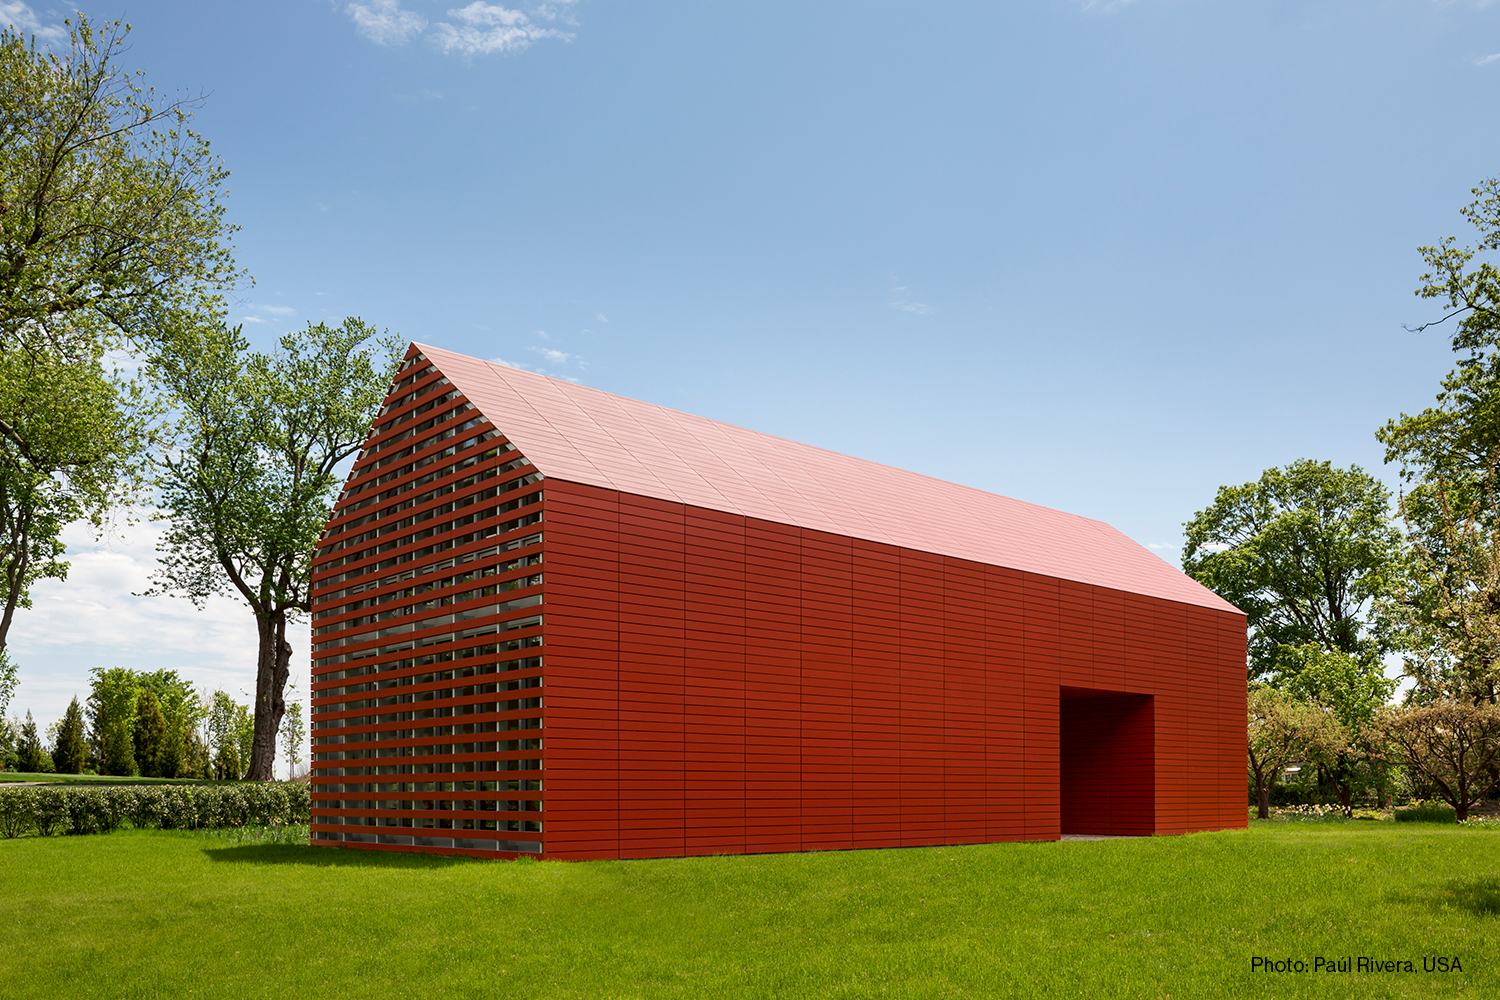 Photo of a red minimalist building in the shape of a barn